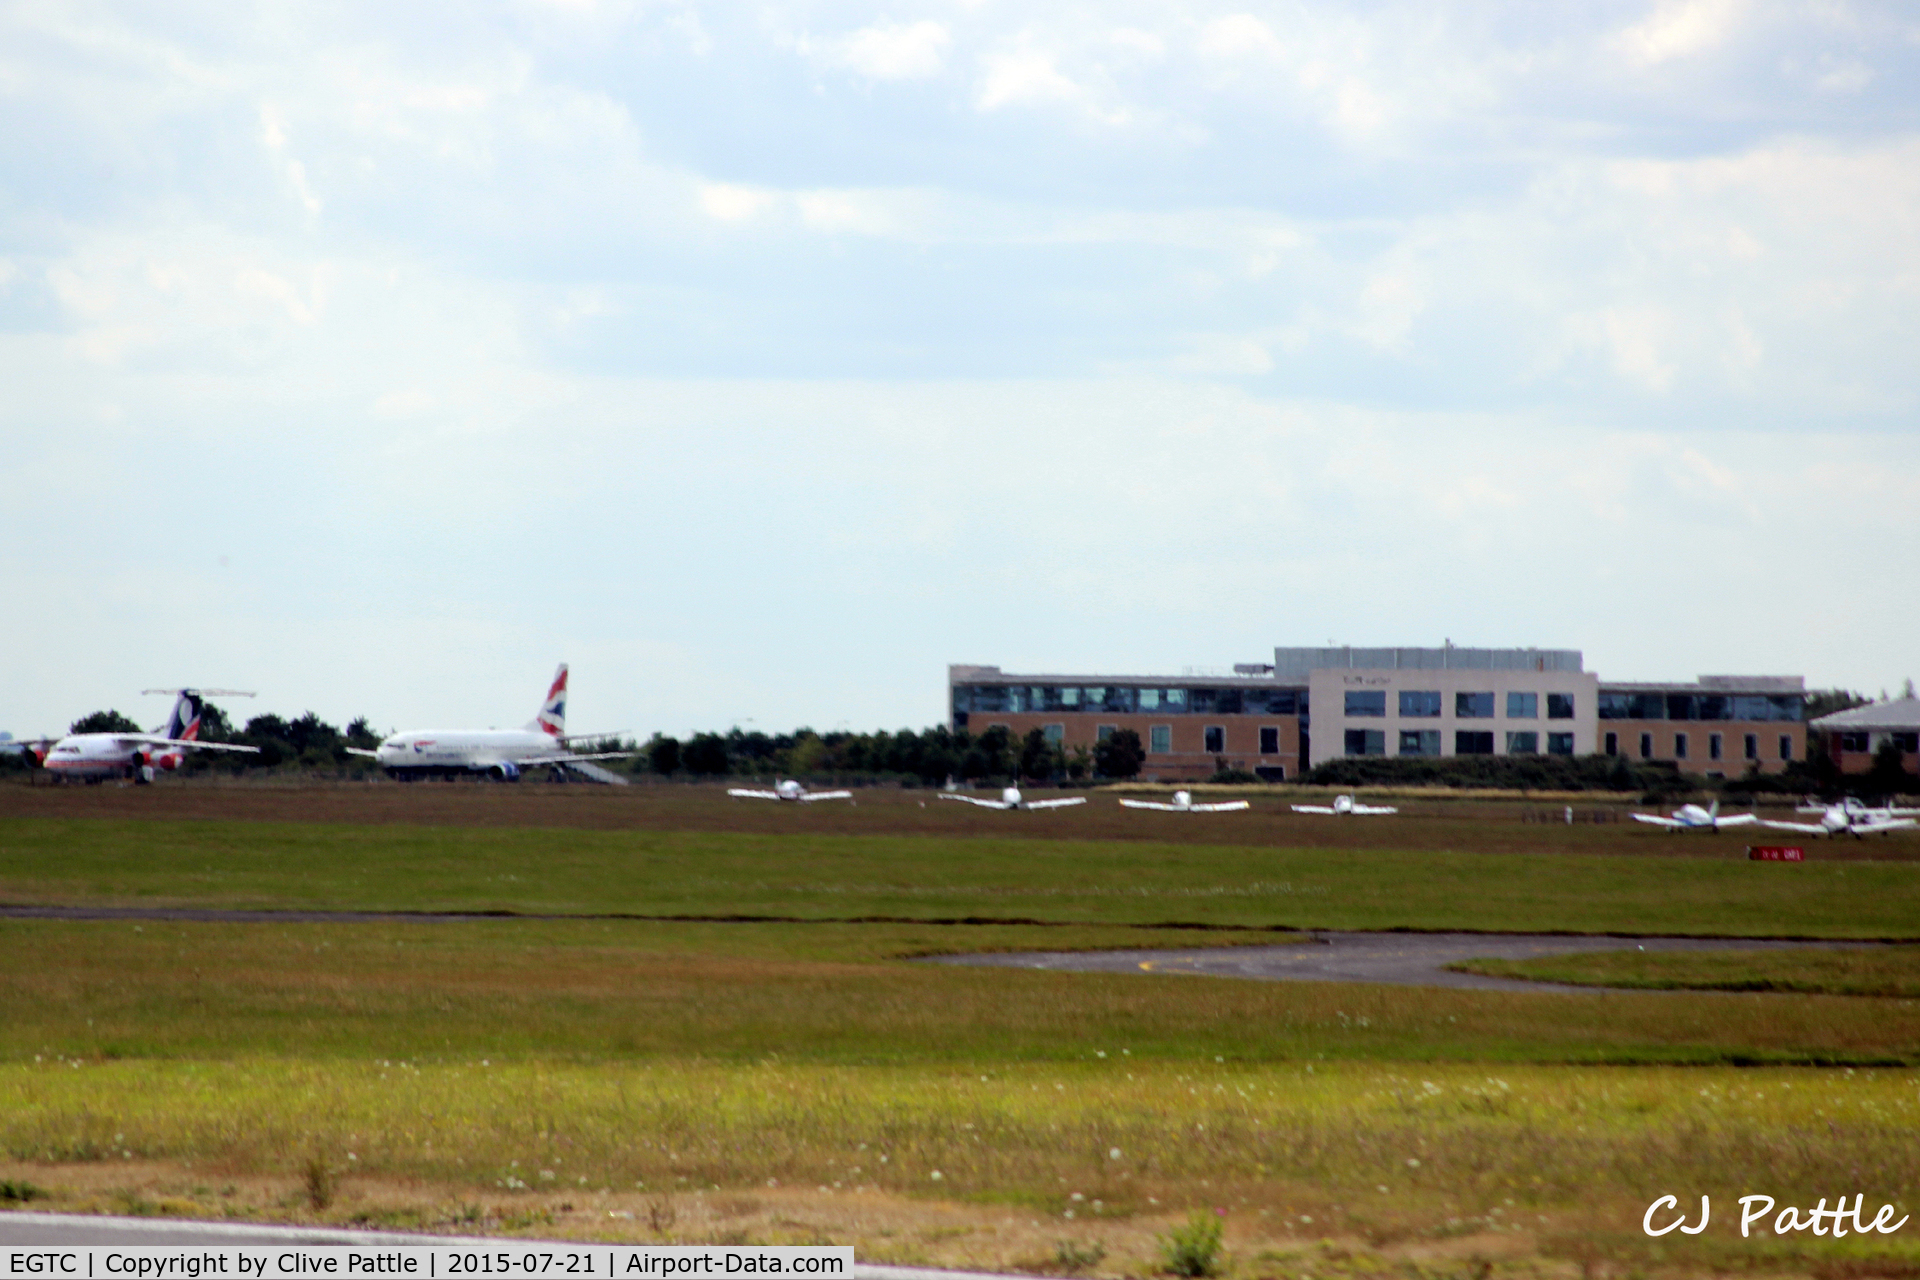 Cranfield Airport, Cranfield, England United Kingdom (EGTC) - Airport and Cranfield University buildings viewed from the runway at Cranfield EGTC. On the left are the two stored airliner instructional airframes, a BAe 146 and a B737.